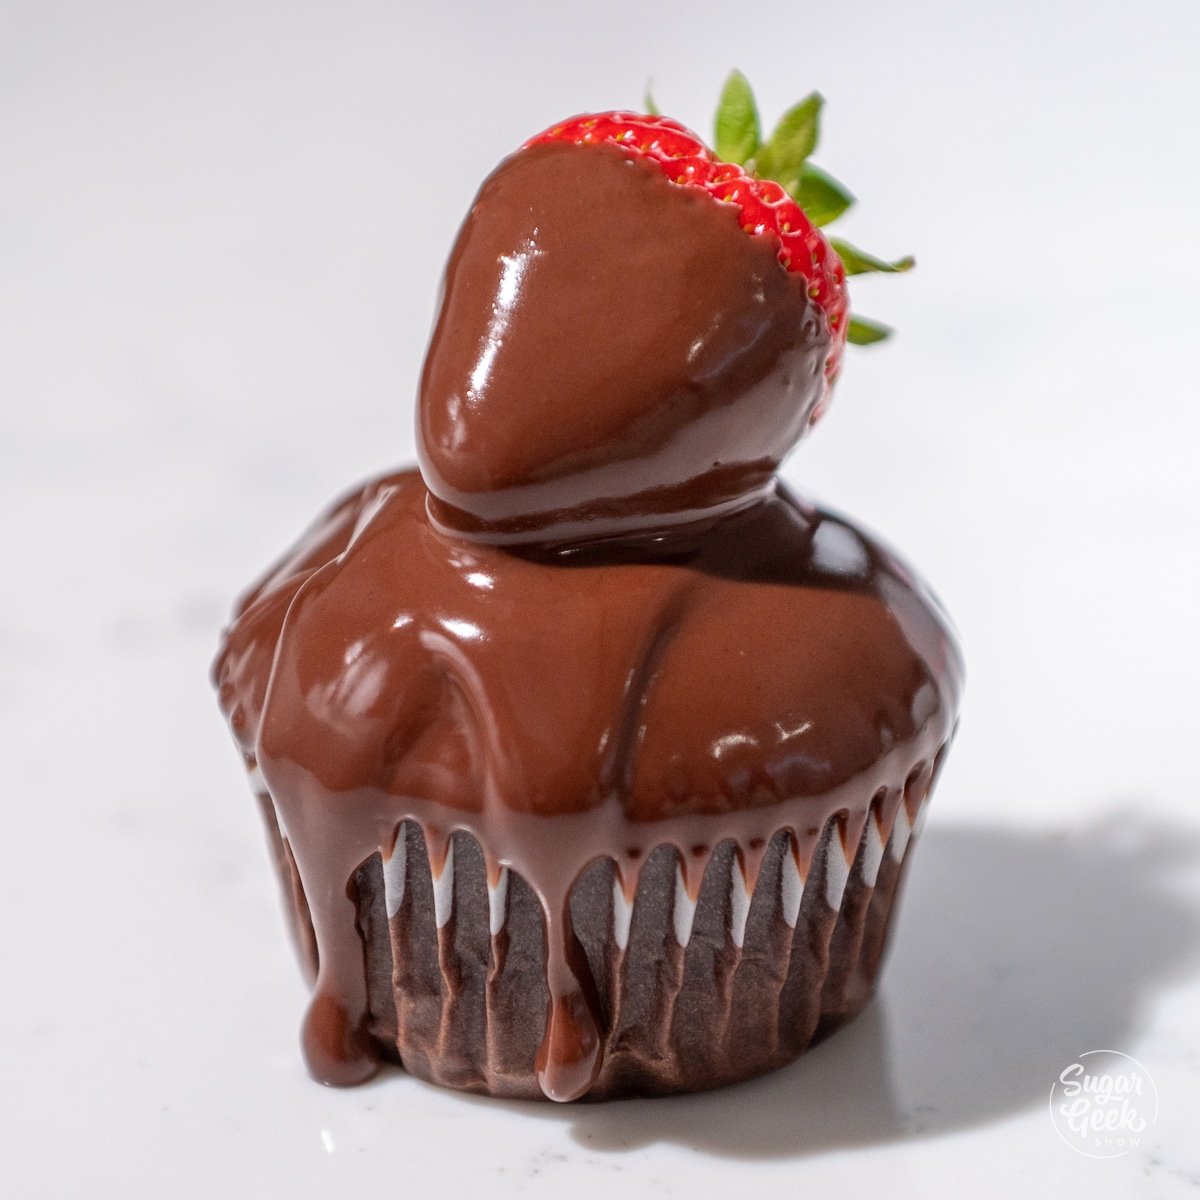 strawberry dipped in ganache on top of a chocolate cupcake